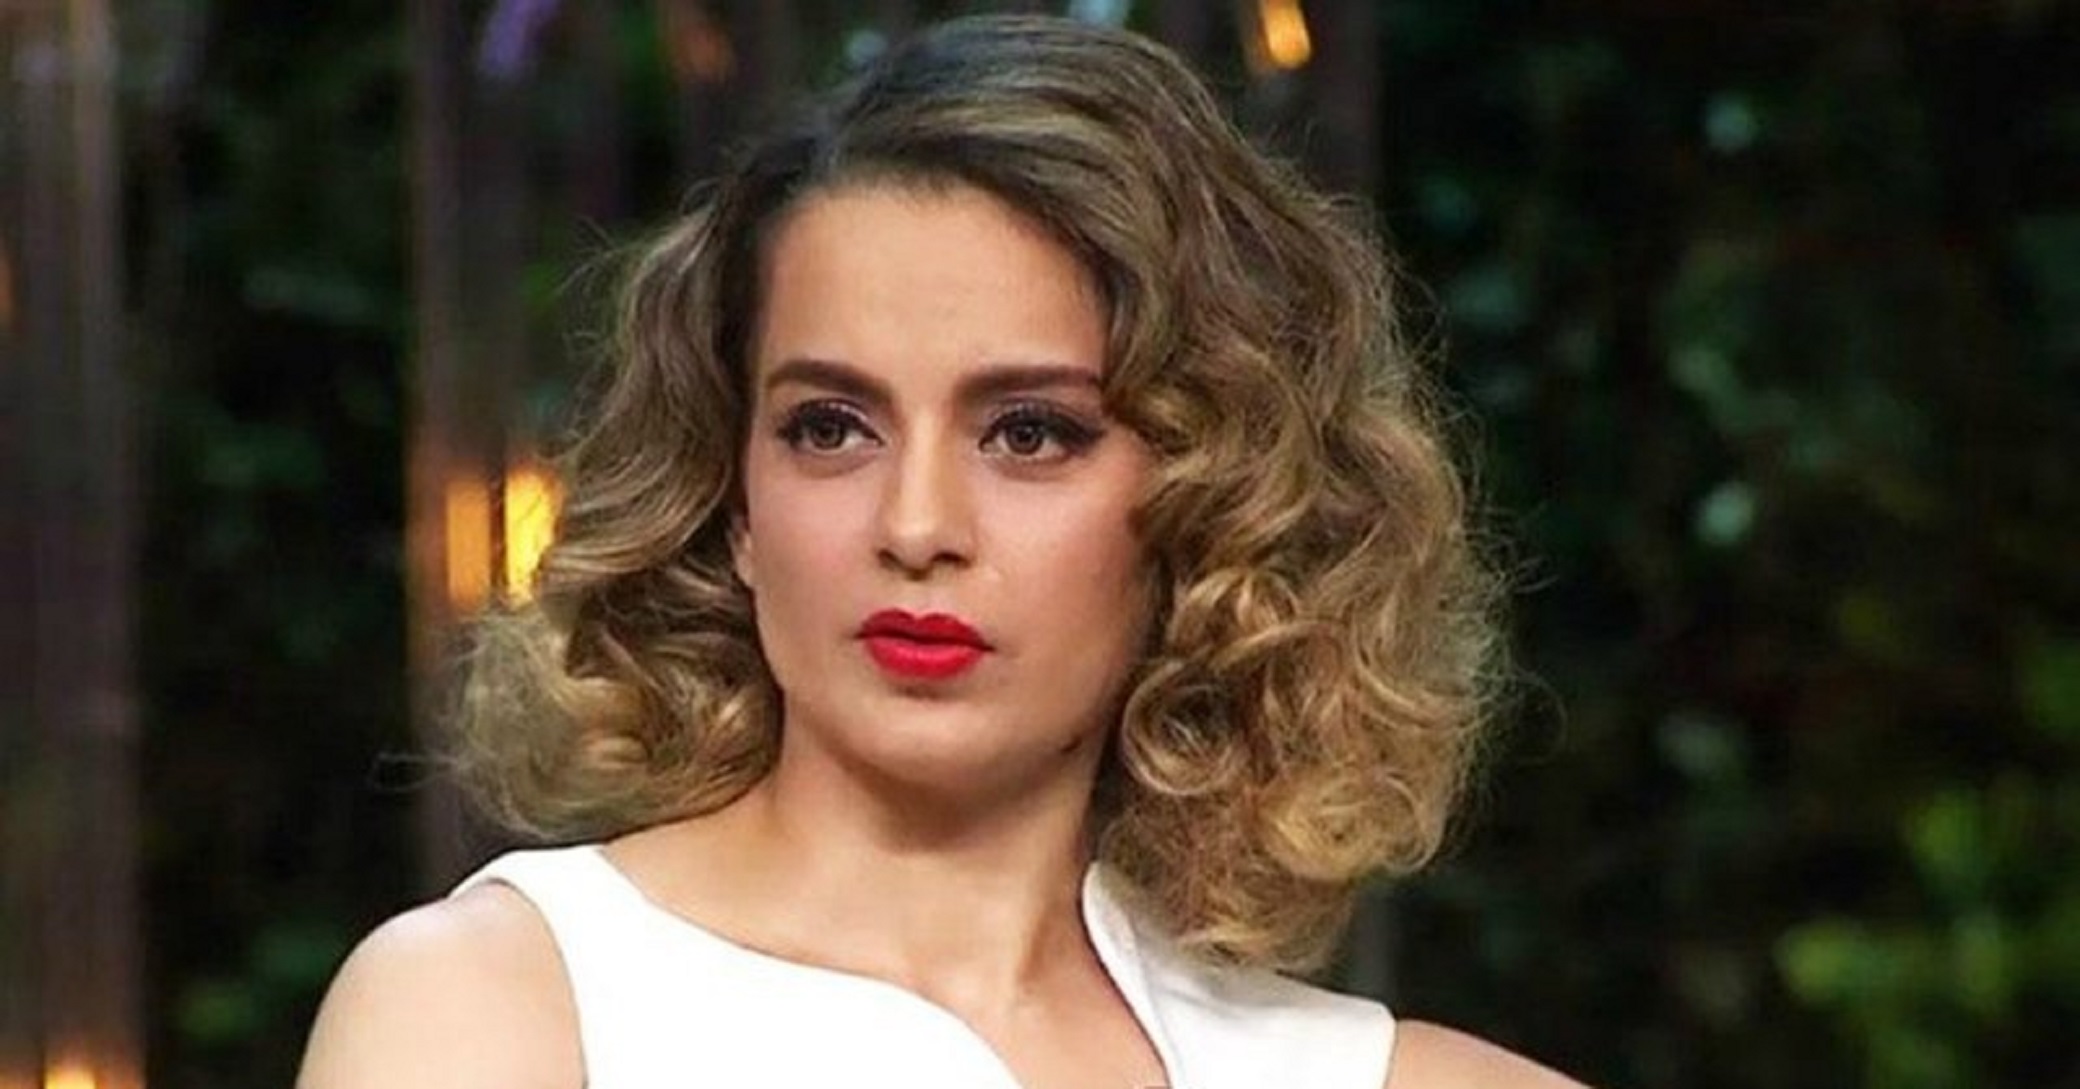 “Javed Akhtar Told Me If I Didn’t Apologise To Hrithik I’d Eventually Commit Suicide,” Kangana Ranaut